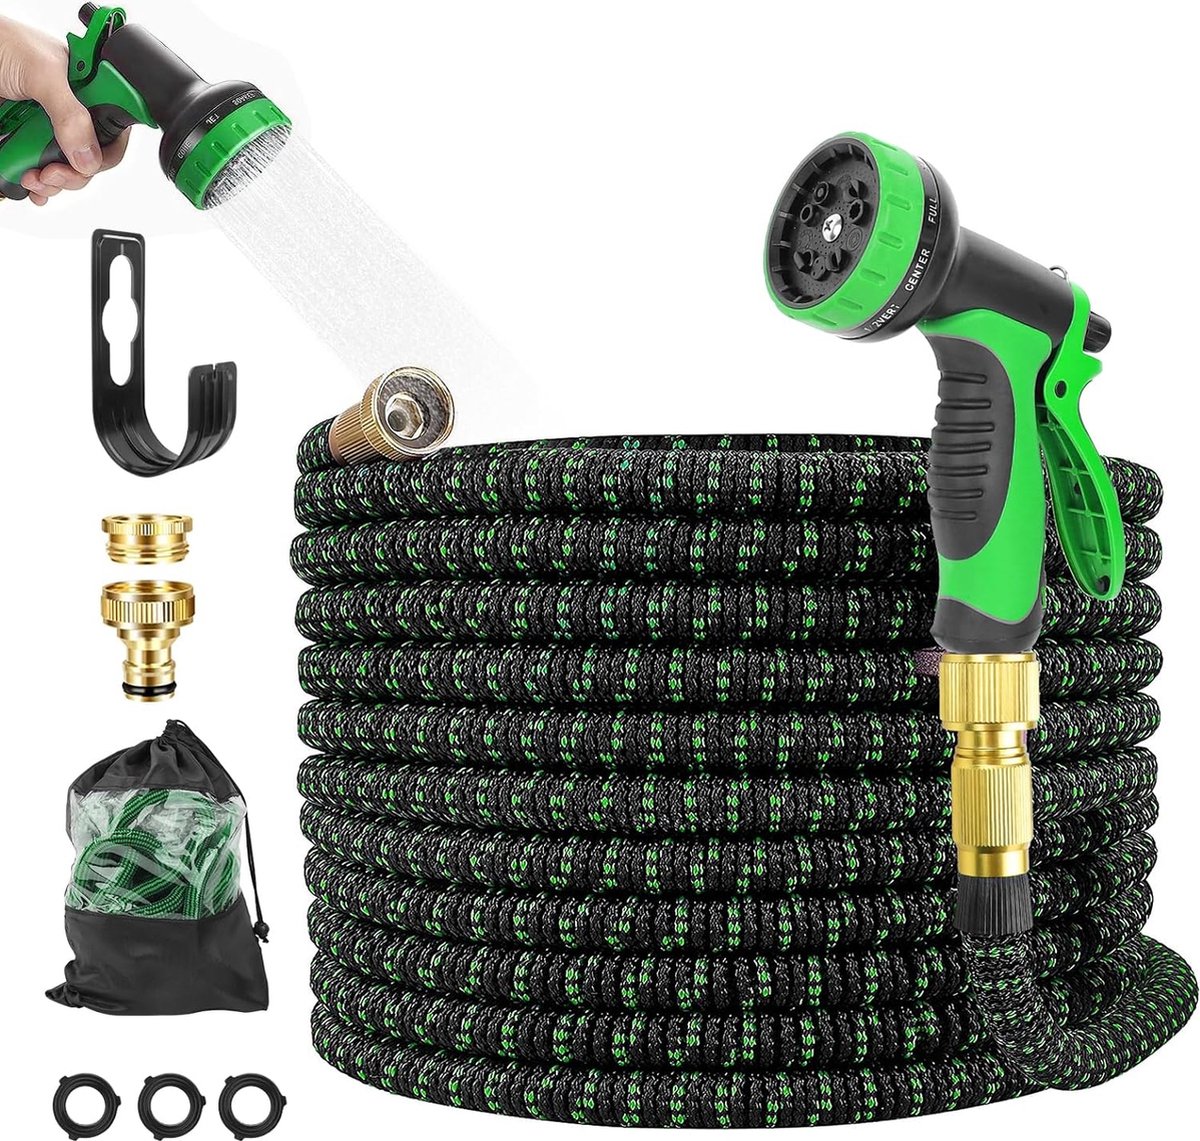 Flexible Garden Hose 15 m Water Hose Flexible 1/2 Inch 3/4 Inch Expandable Water Hose Flexible Garden Hose 10 Functions Spray Nozzle Garden Trousers for Watering Cleaning Car Washing